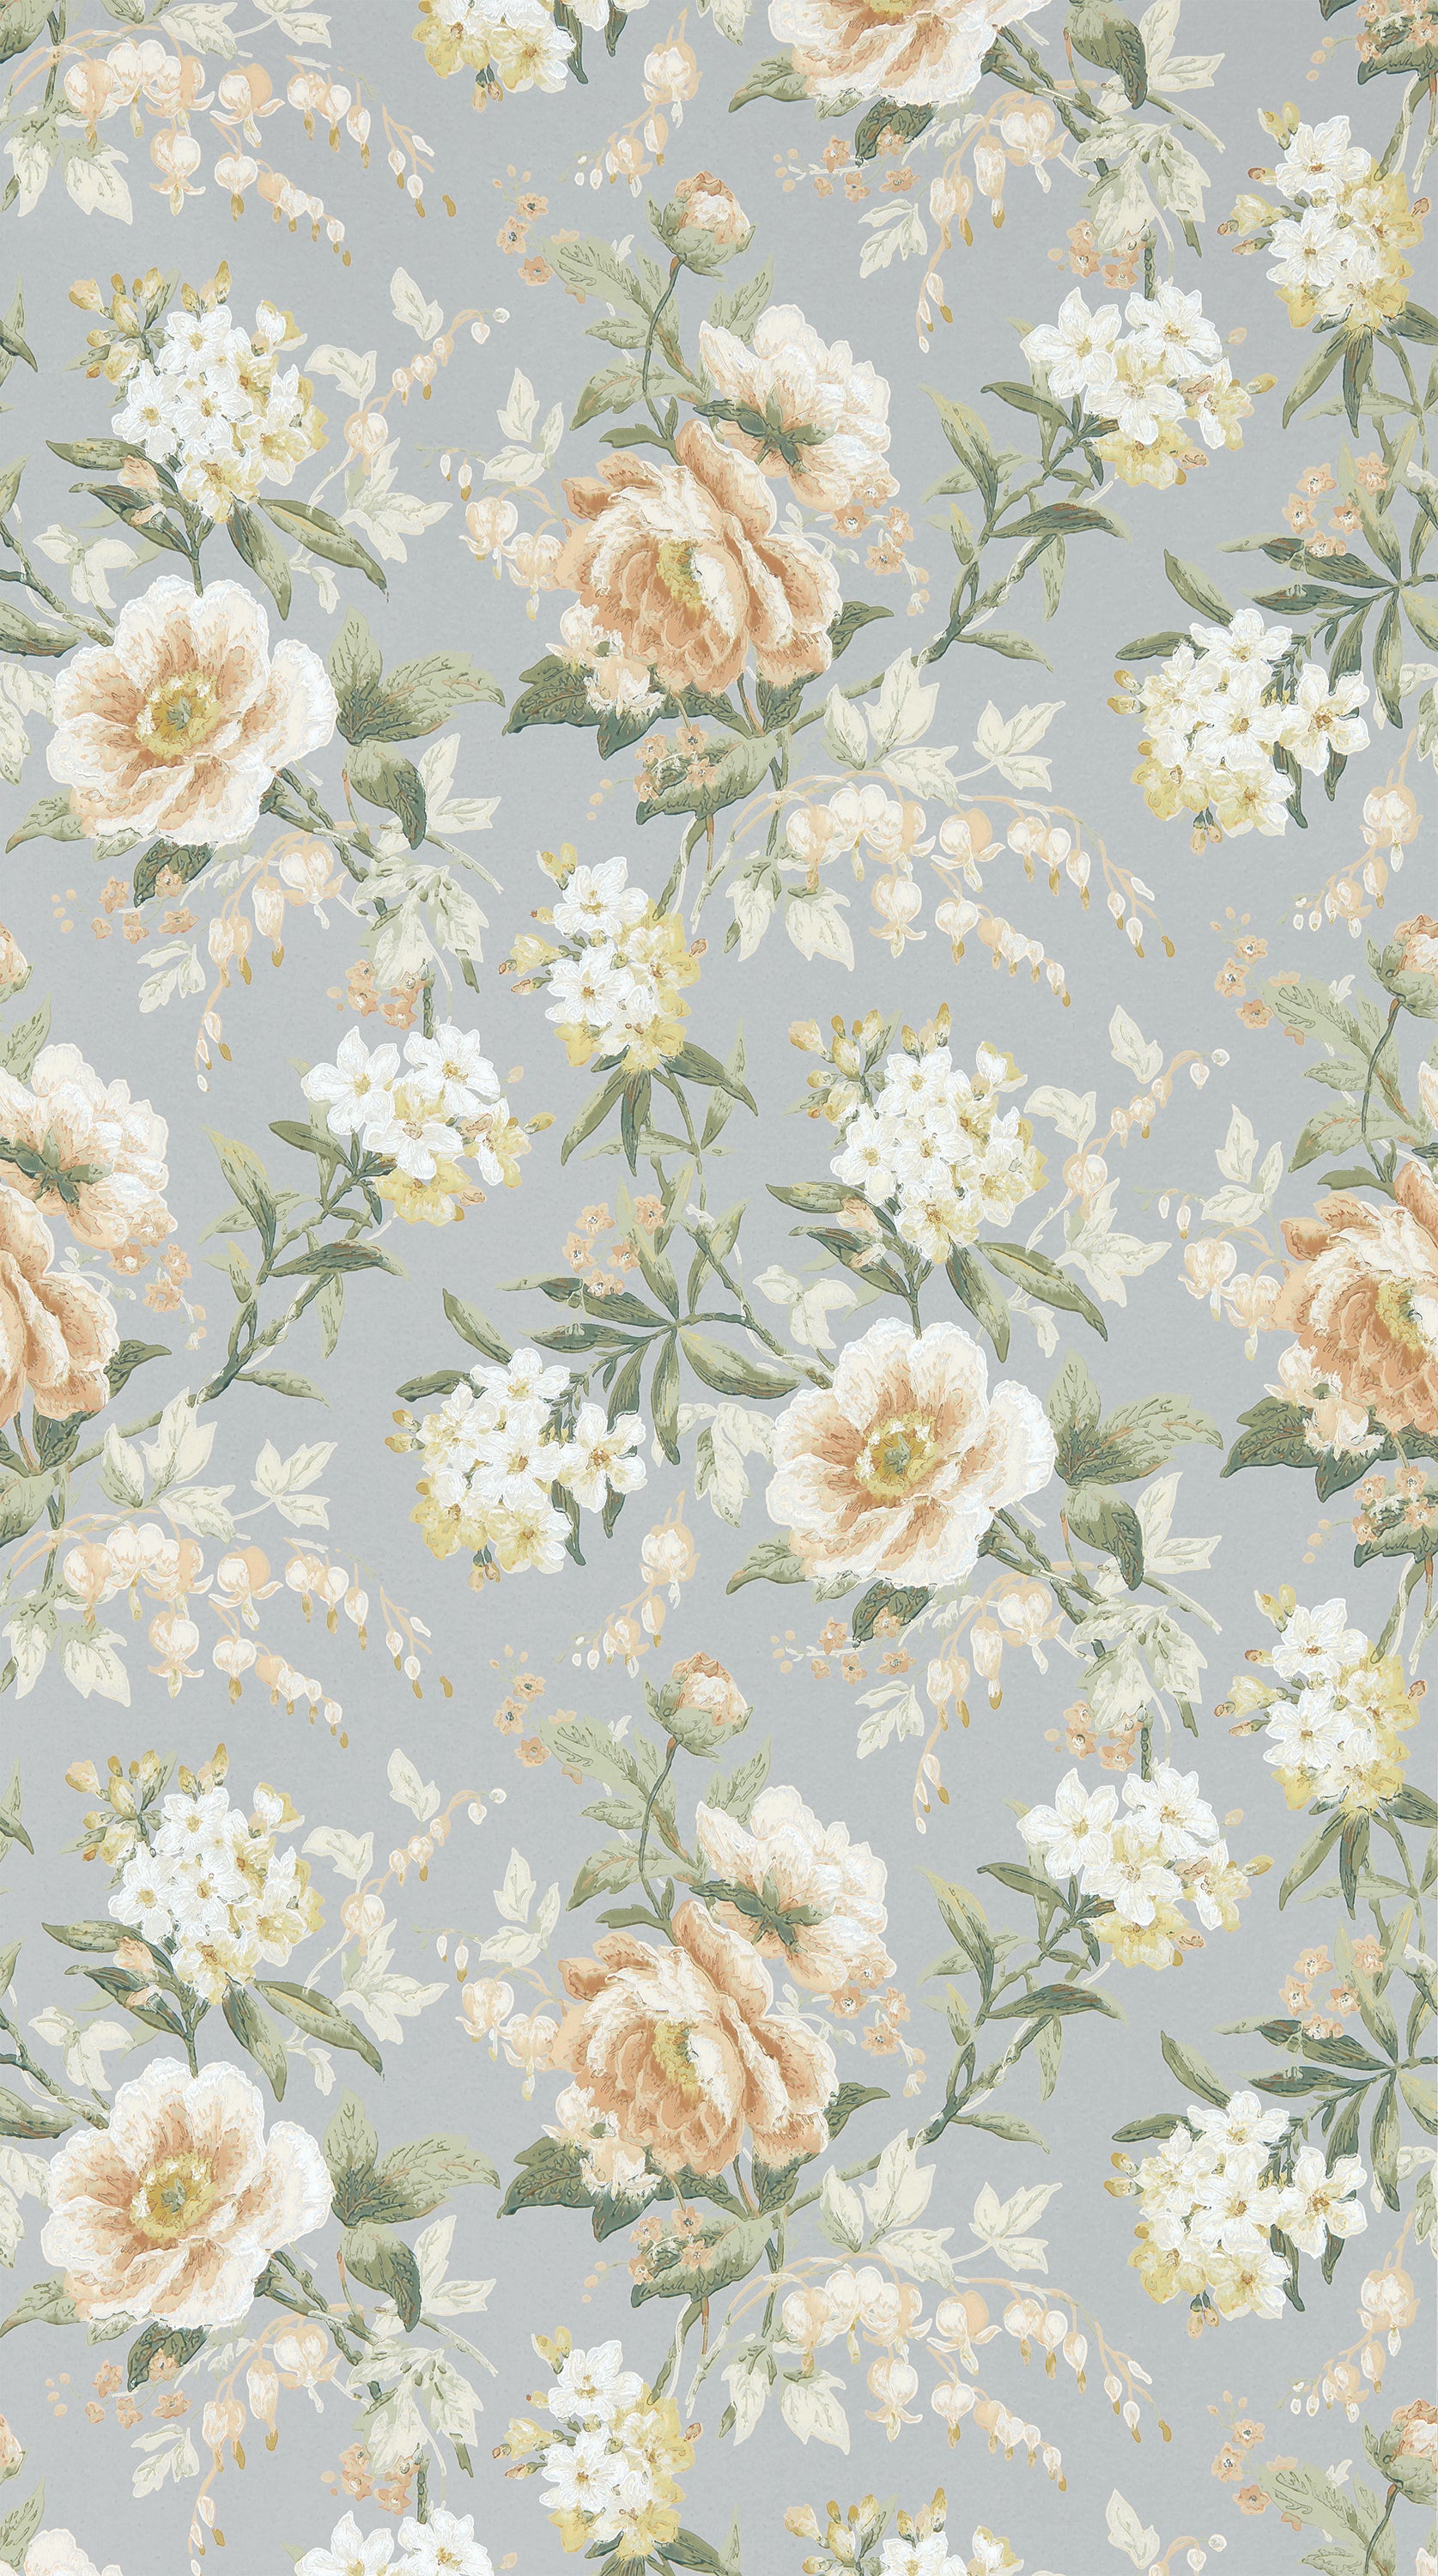 Sanderson / ONE SIXTY WALLPAPER COLLECTION / Olivia Sky Mist / Tan